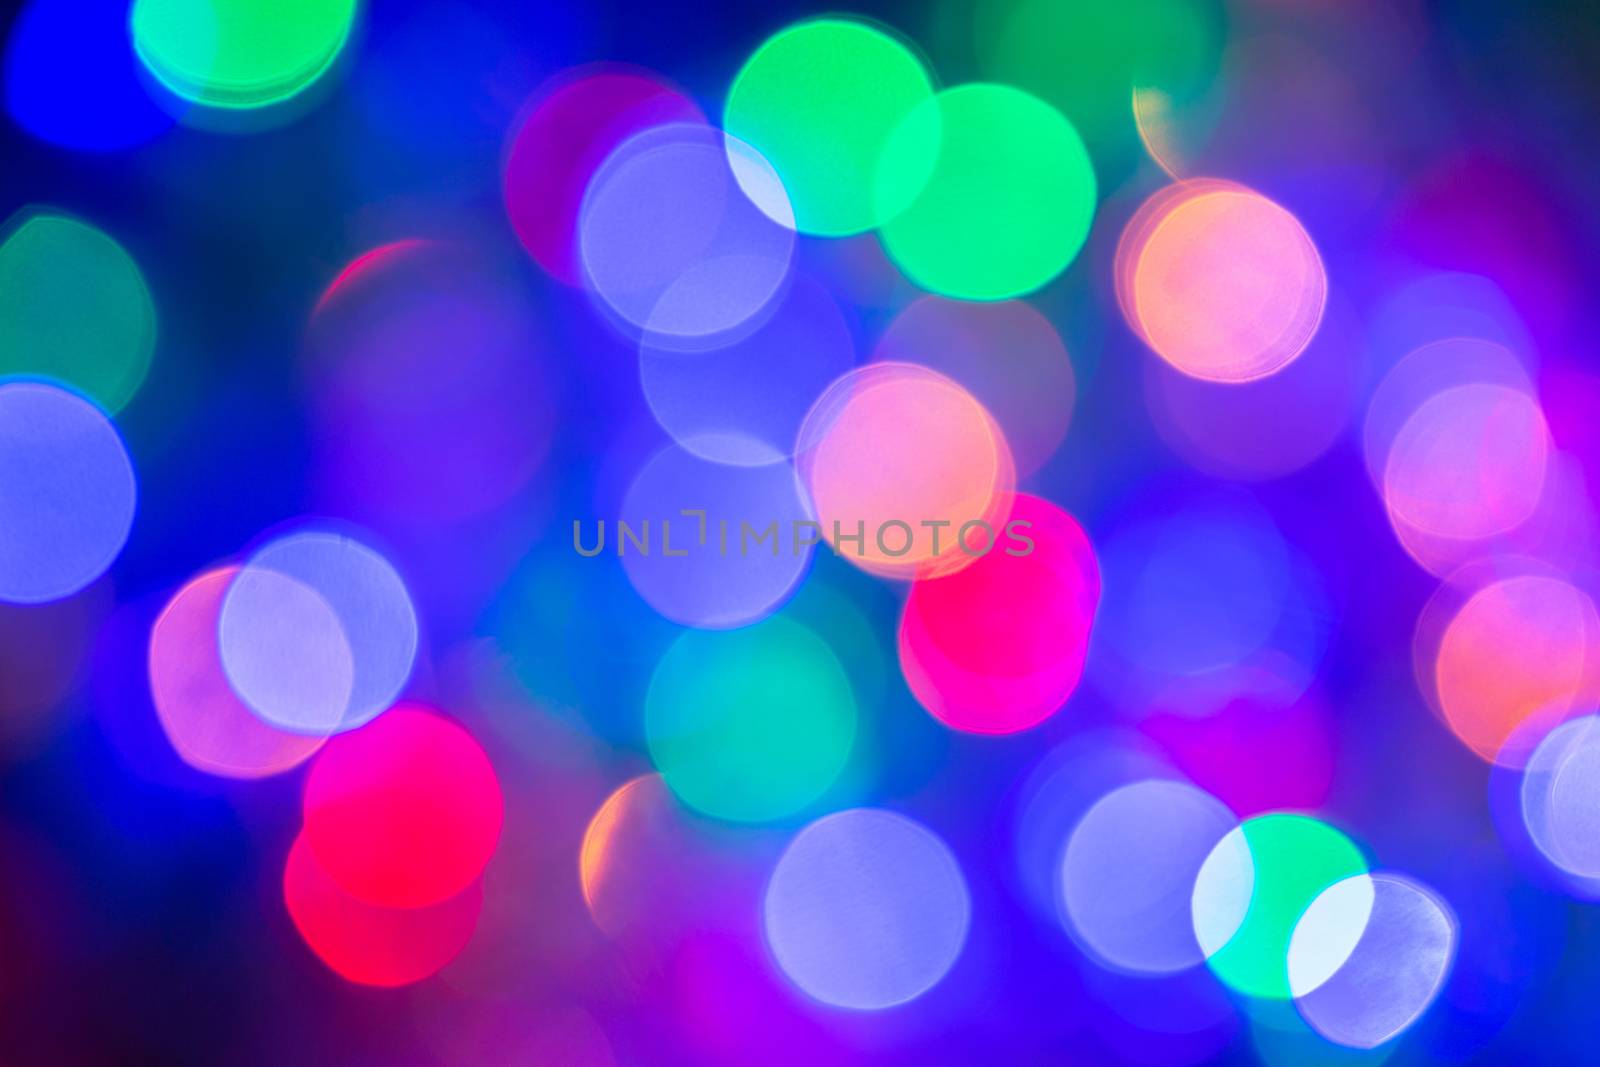 Colorful abstract blurred circular bokeh light of night city street for background. graphic design and website template design.